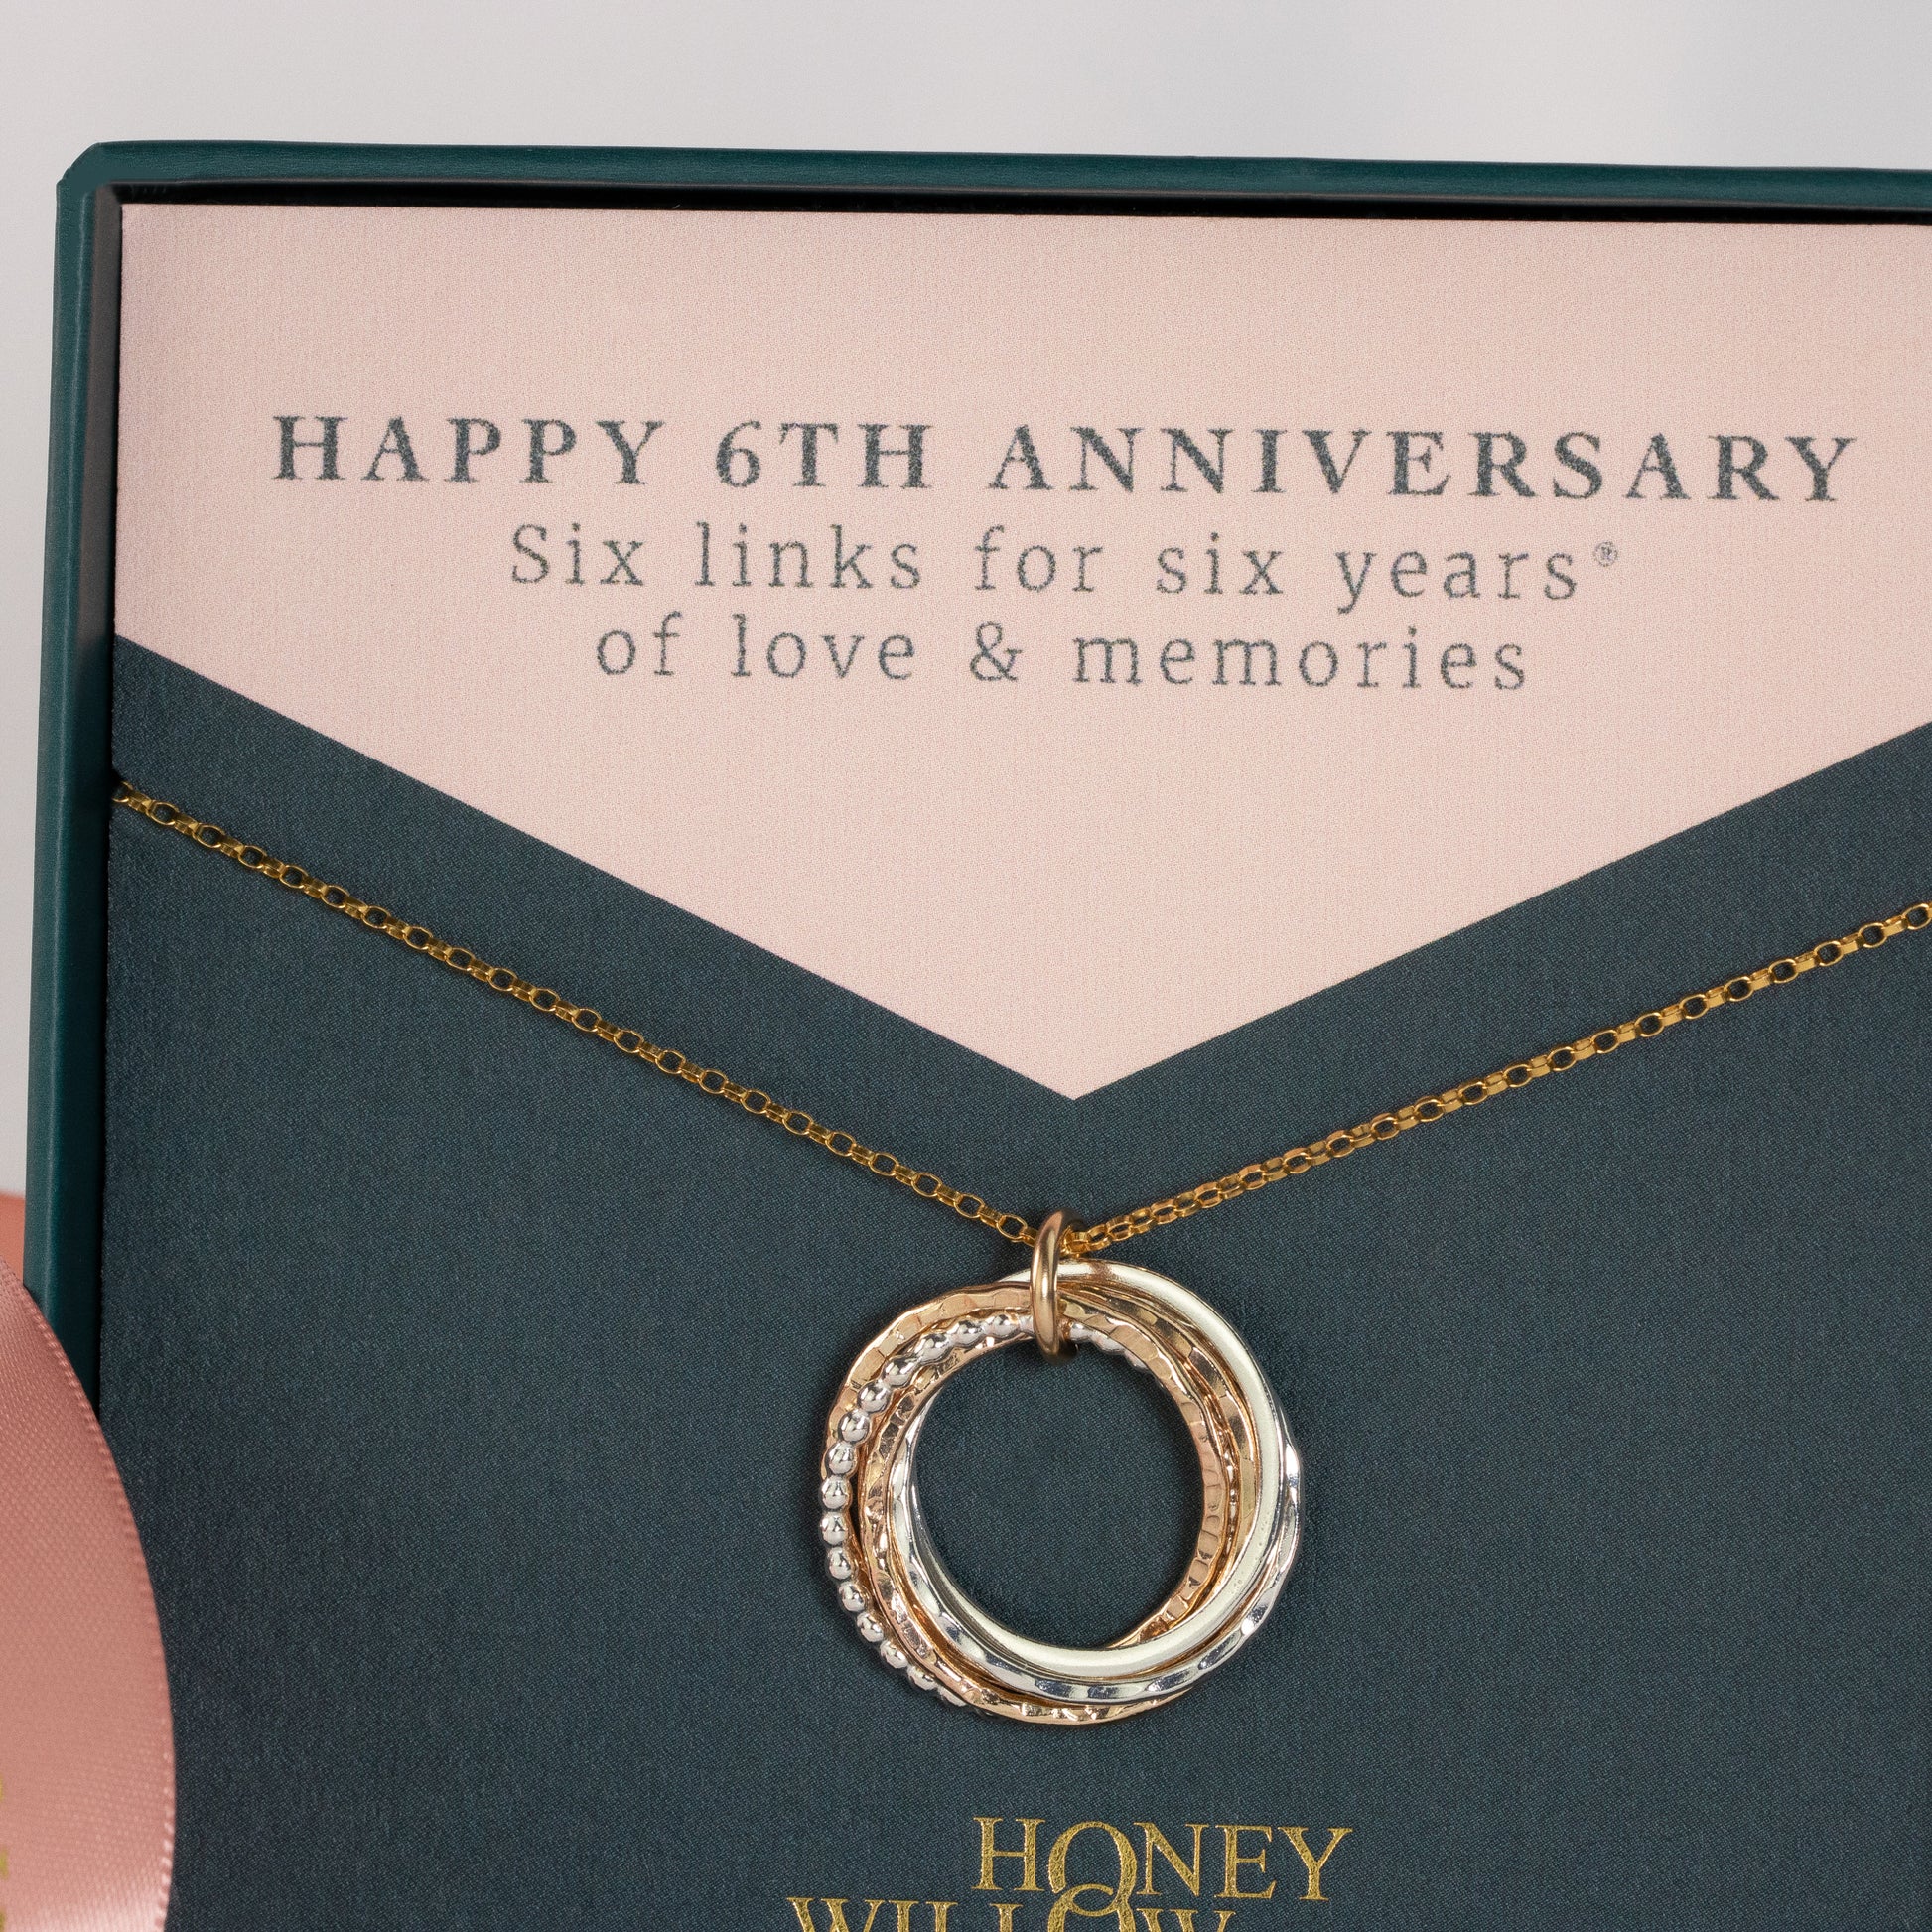 6th Anniversary Necklace - The Original 6 Rings for 6 Years Necklace - Silver & Gold